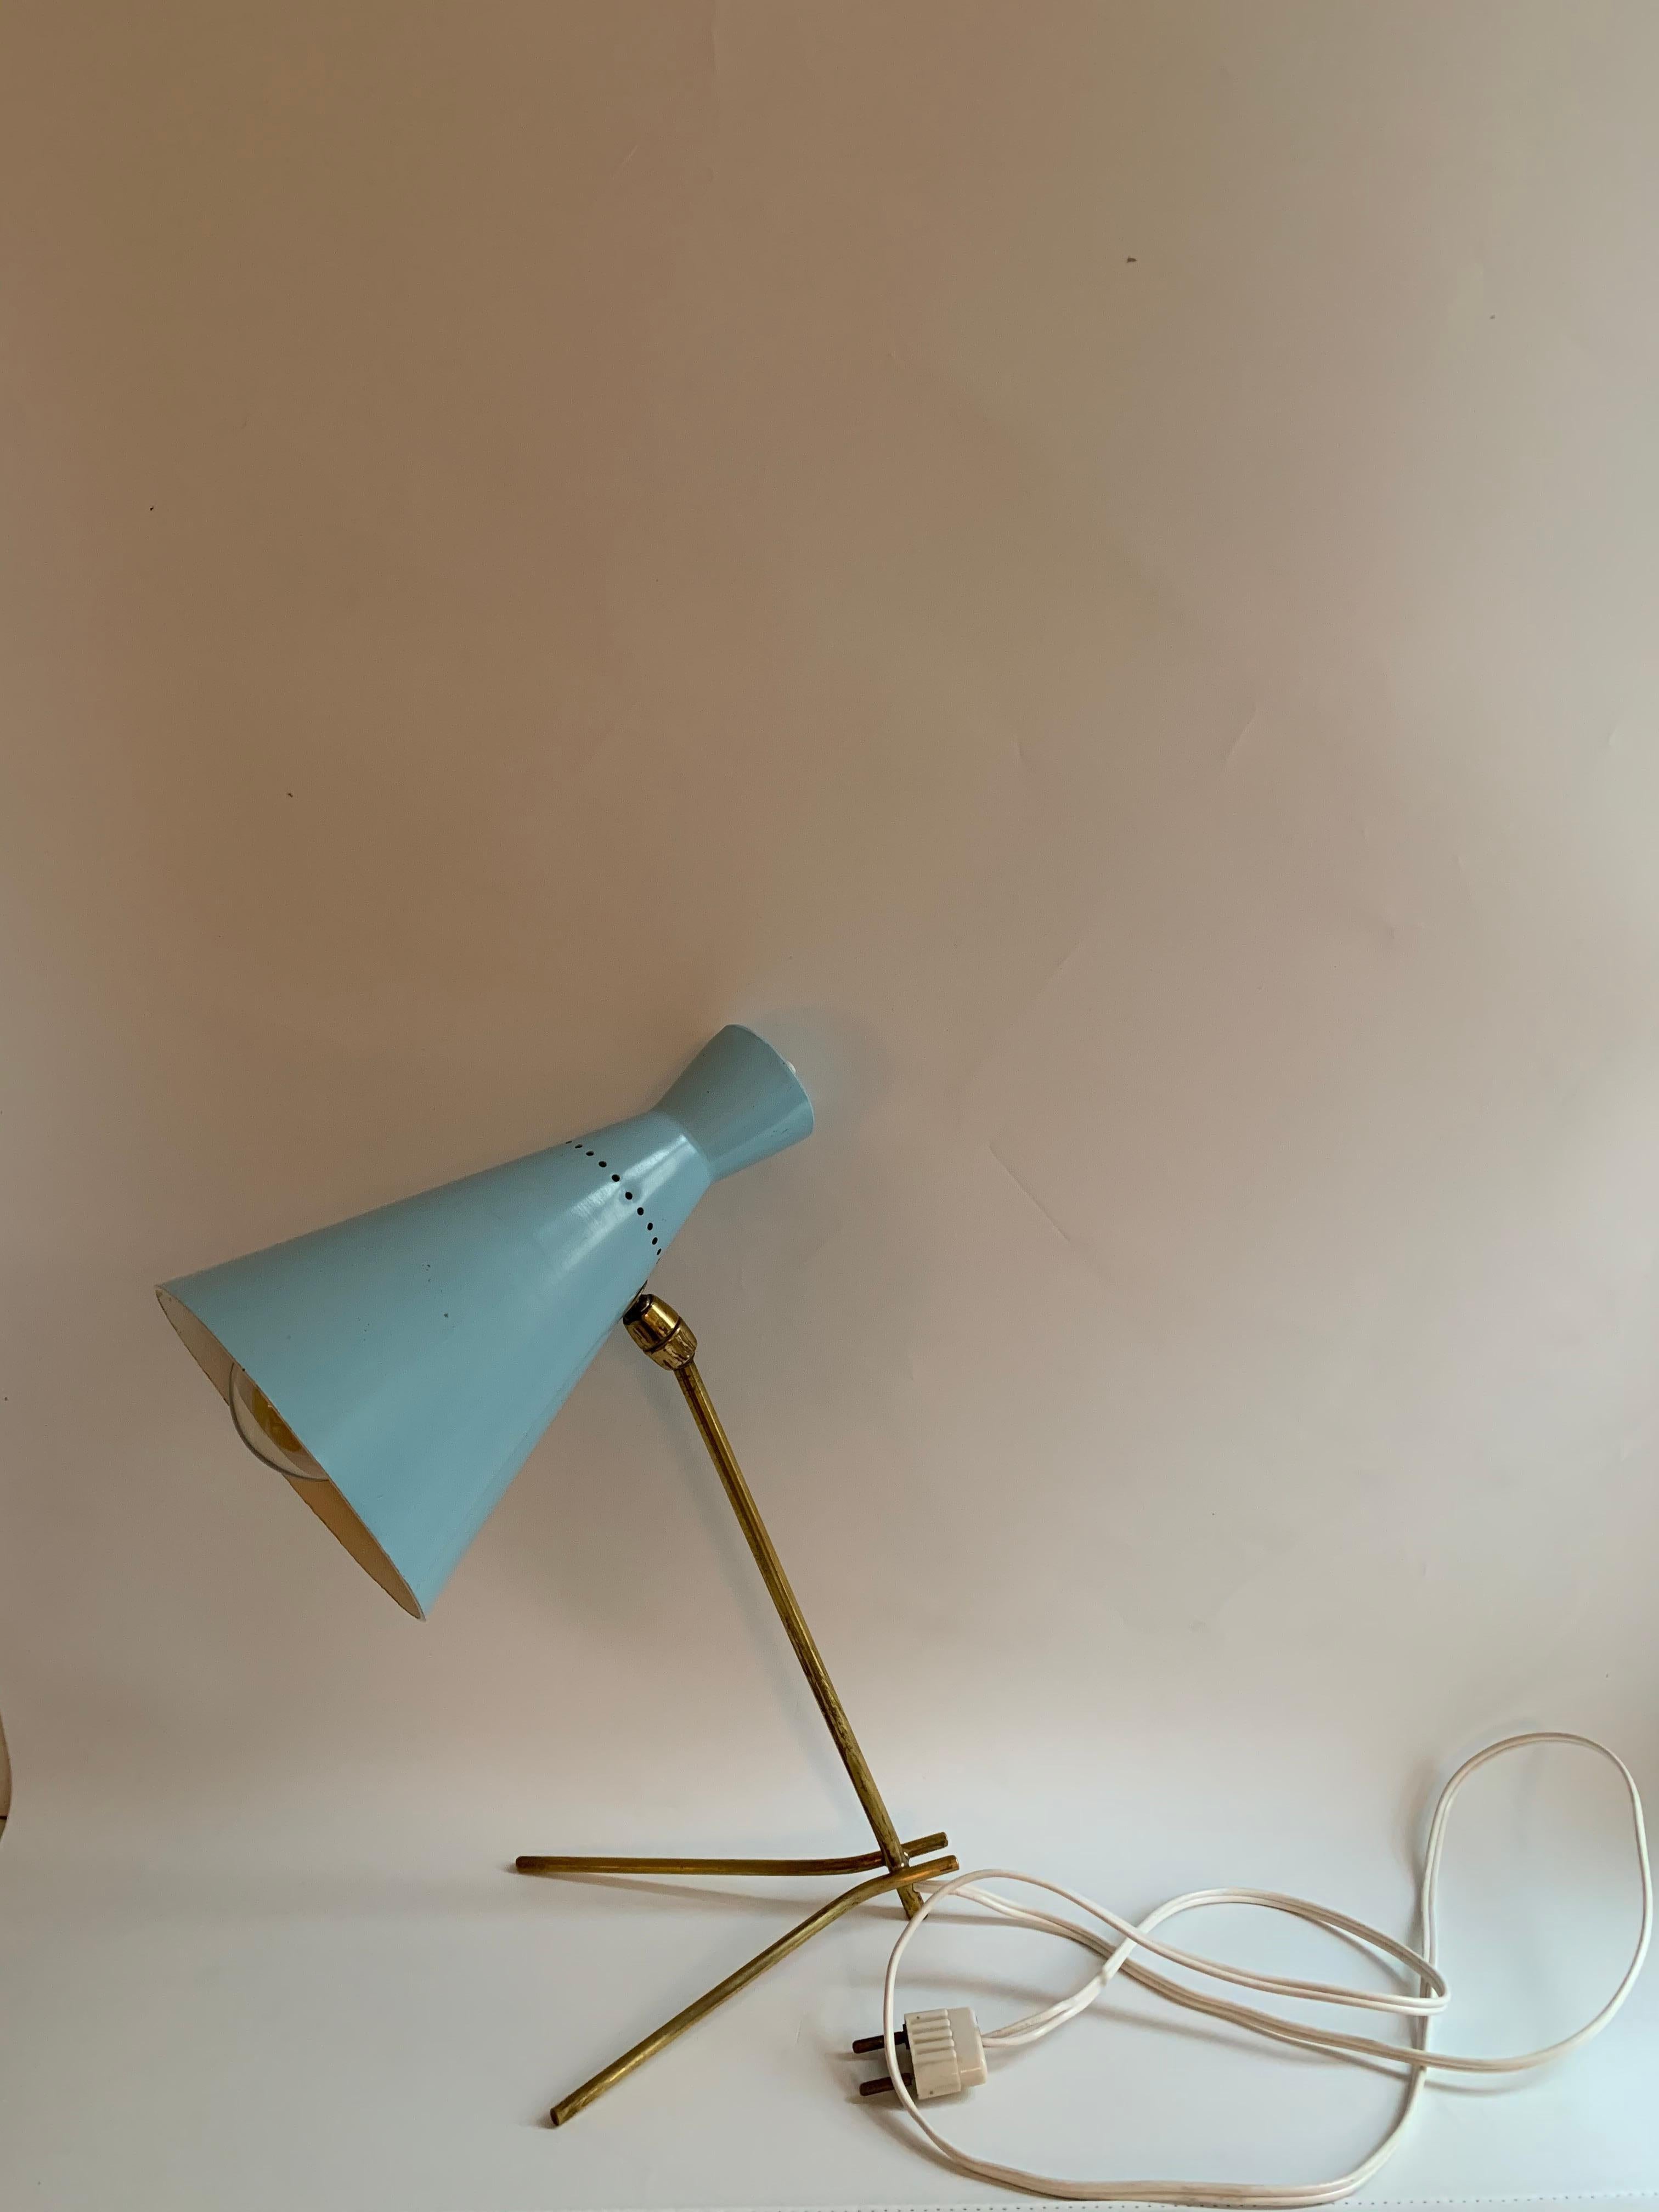 1950s Stilux Milano light blue and brass table lamp. This extremely rare and iconic design is executed in light blue paint and has a messing foot, with original color, and EU wiring in excellent vintage condition. Shade adjustable at two points for